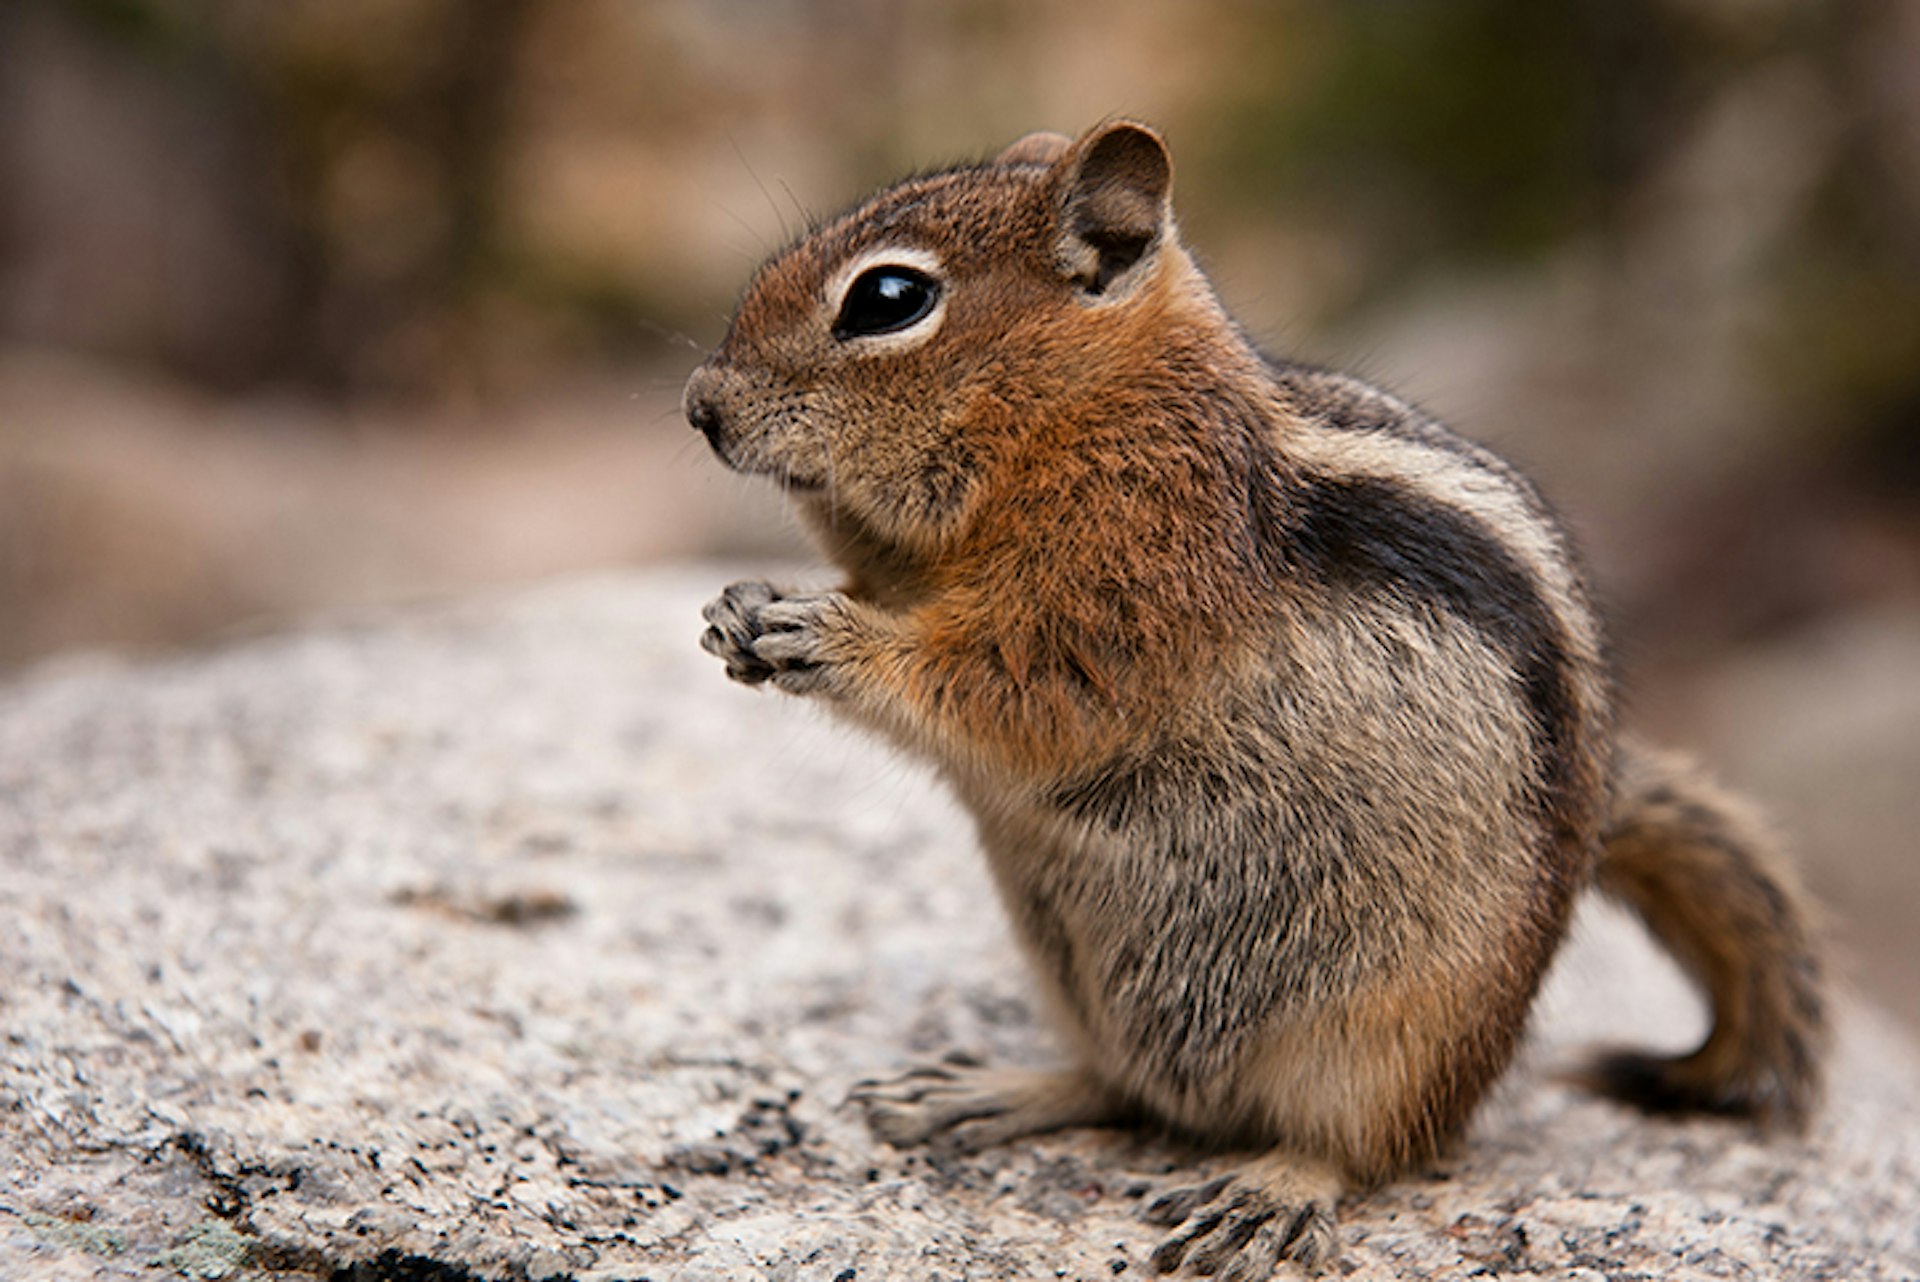 Chipmunks play an important role in the forest ecosystem, consuming fungi and planting seeds. Image by flamouroux / CC BY-SA 2.0